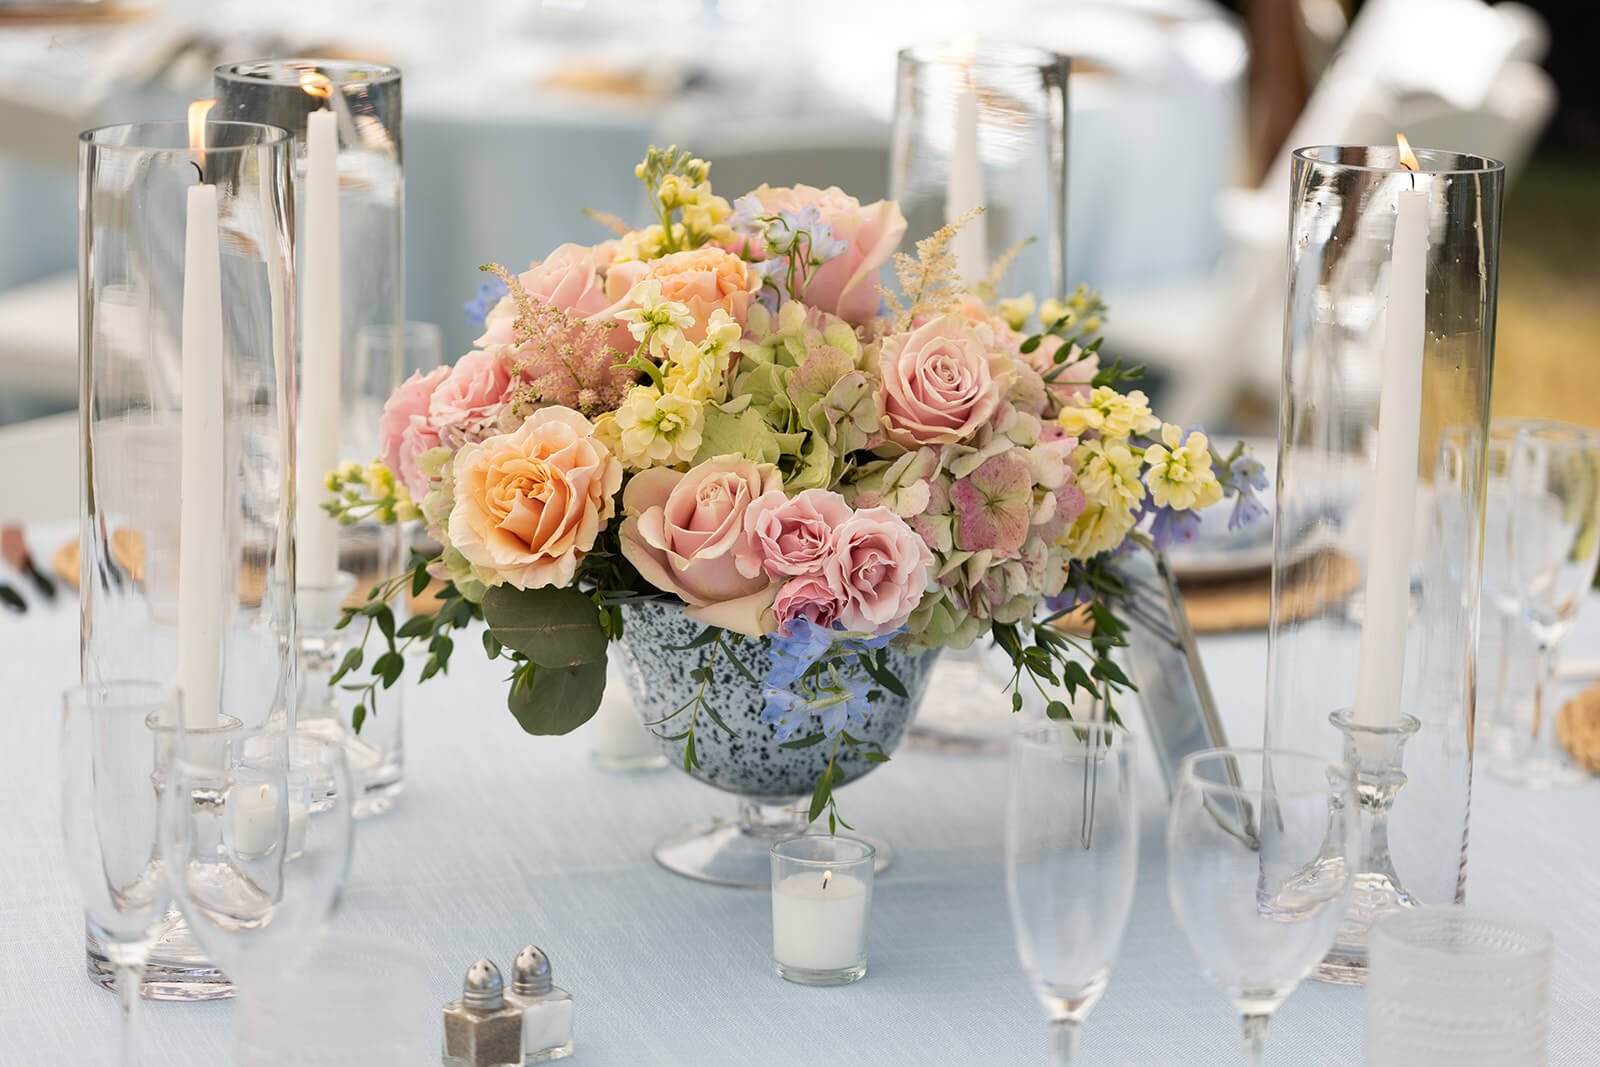 Floral centerpiece with blush roses and green hydrangeas at a summer wedding reception